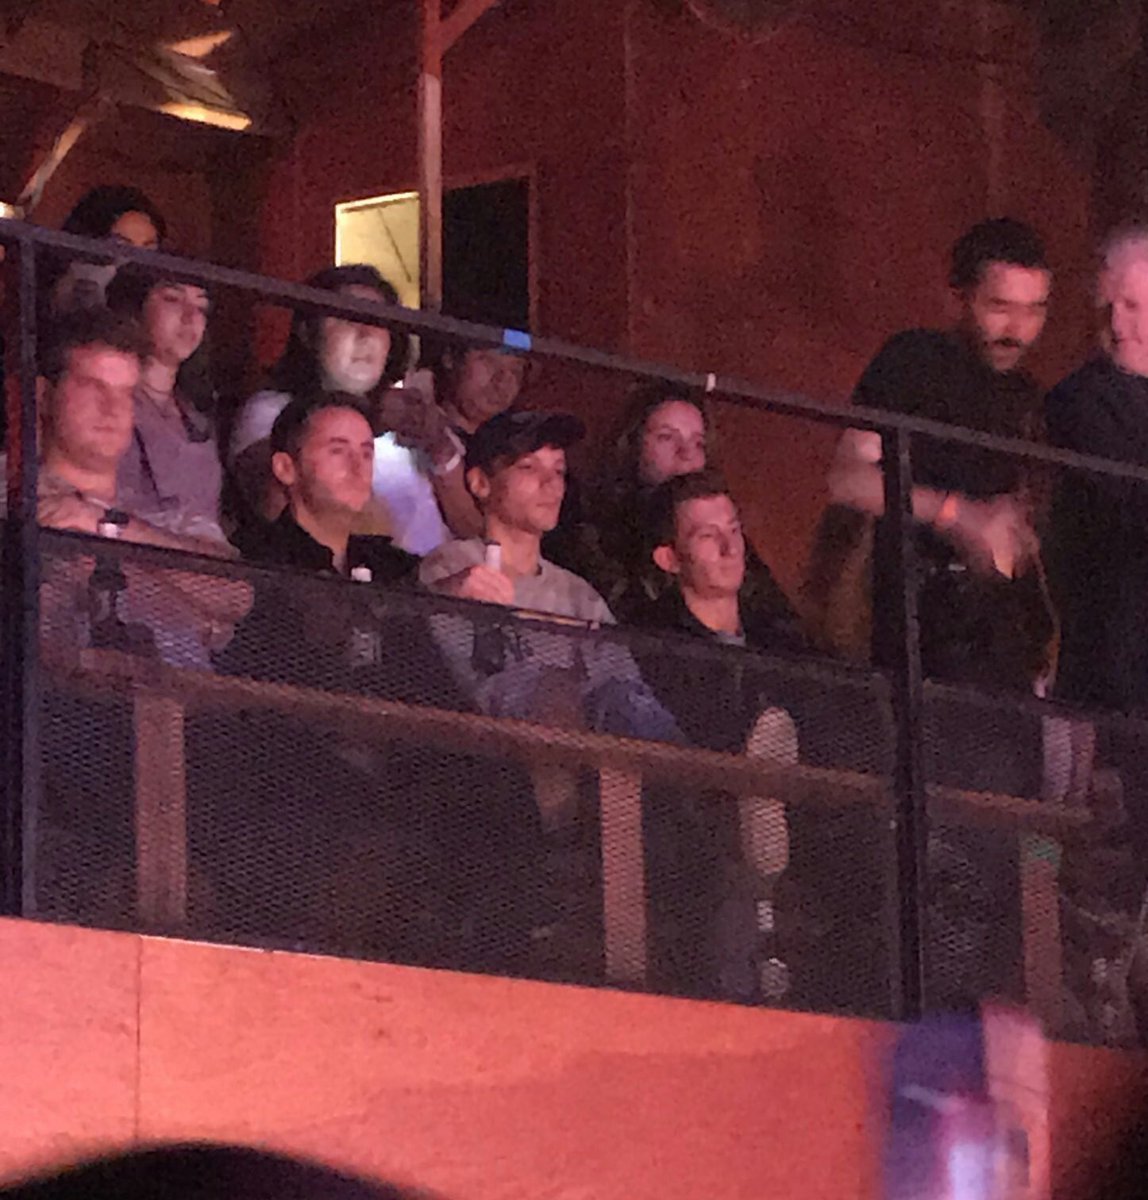 To make matters even more interesting he openly attends NiaII’s show at the Troubadour on the 21st, meaning the day right after H’s show 